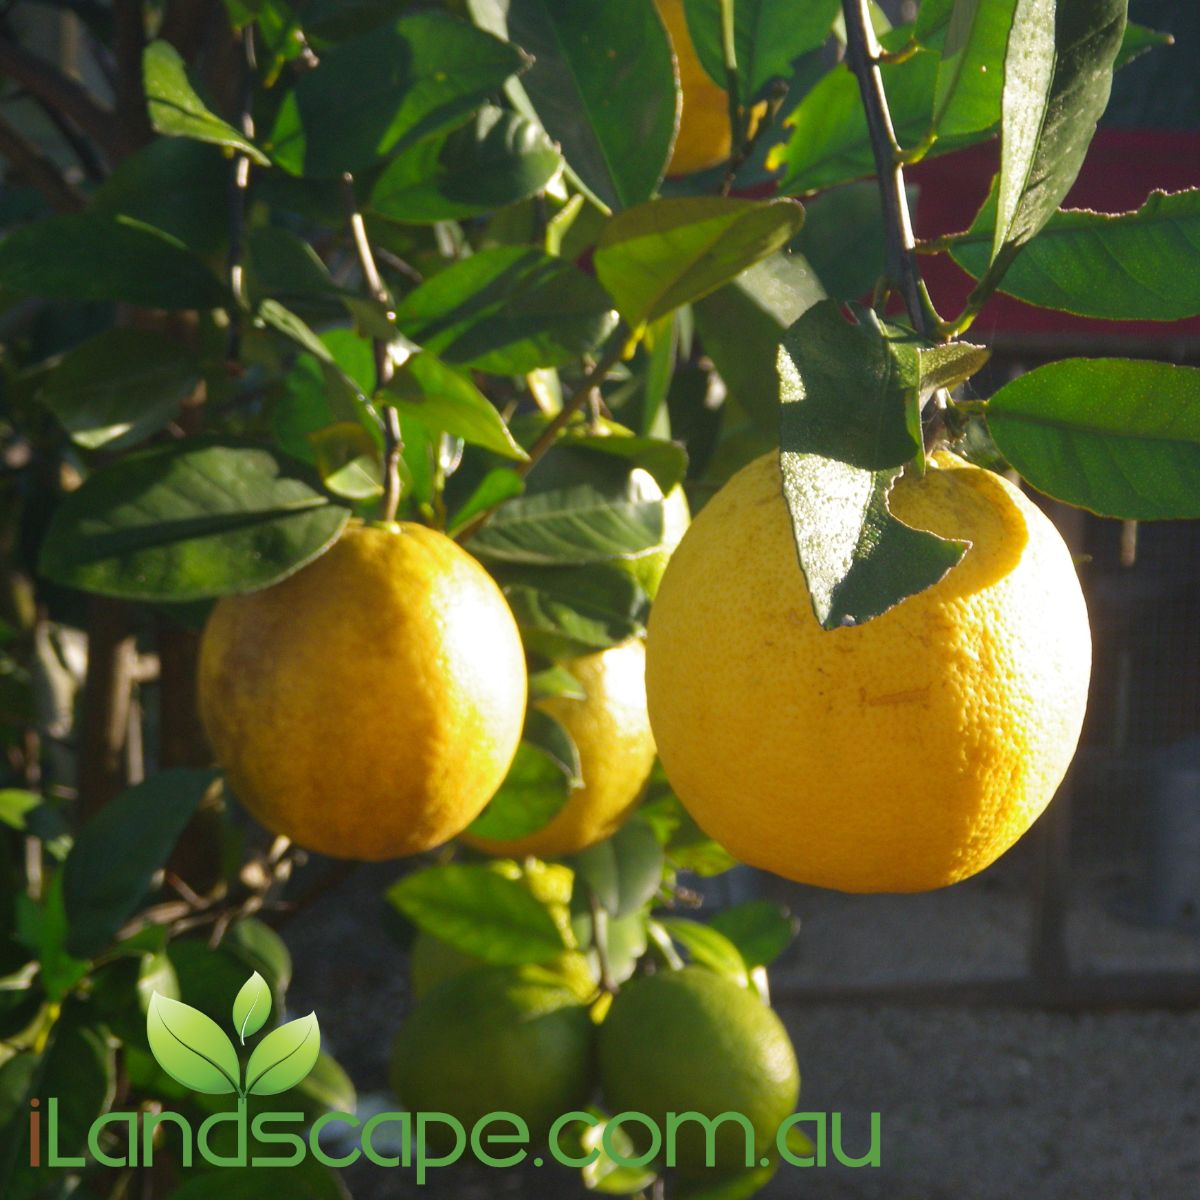 Lemonade Dwarf is a juicy fruit that taste just like lemonade and can eaten directly from the bush. the Lemonade dwarf tree grows approx. 1-2m tall and fruits between June - October each year.  Fertilise seasonally with Fruit & Citrus food and prune regular to keep shape and promote more fruit development 